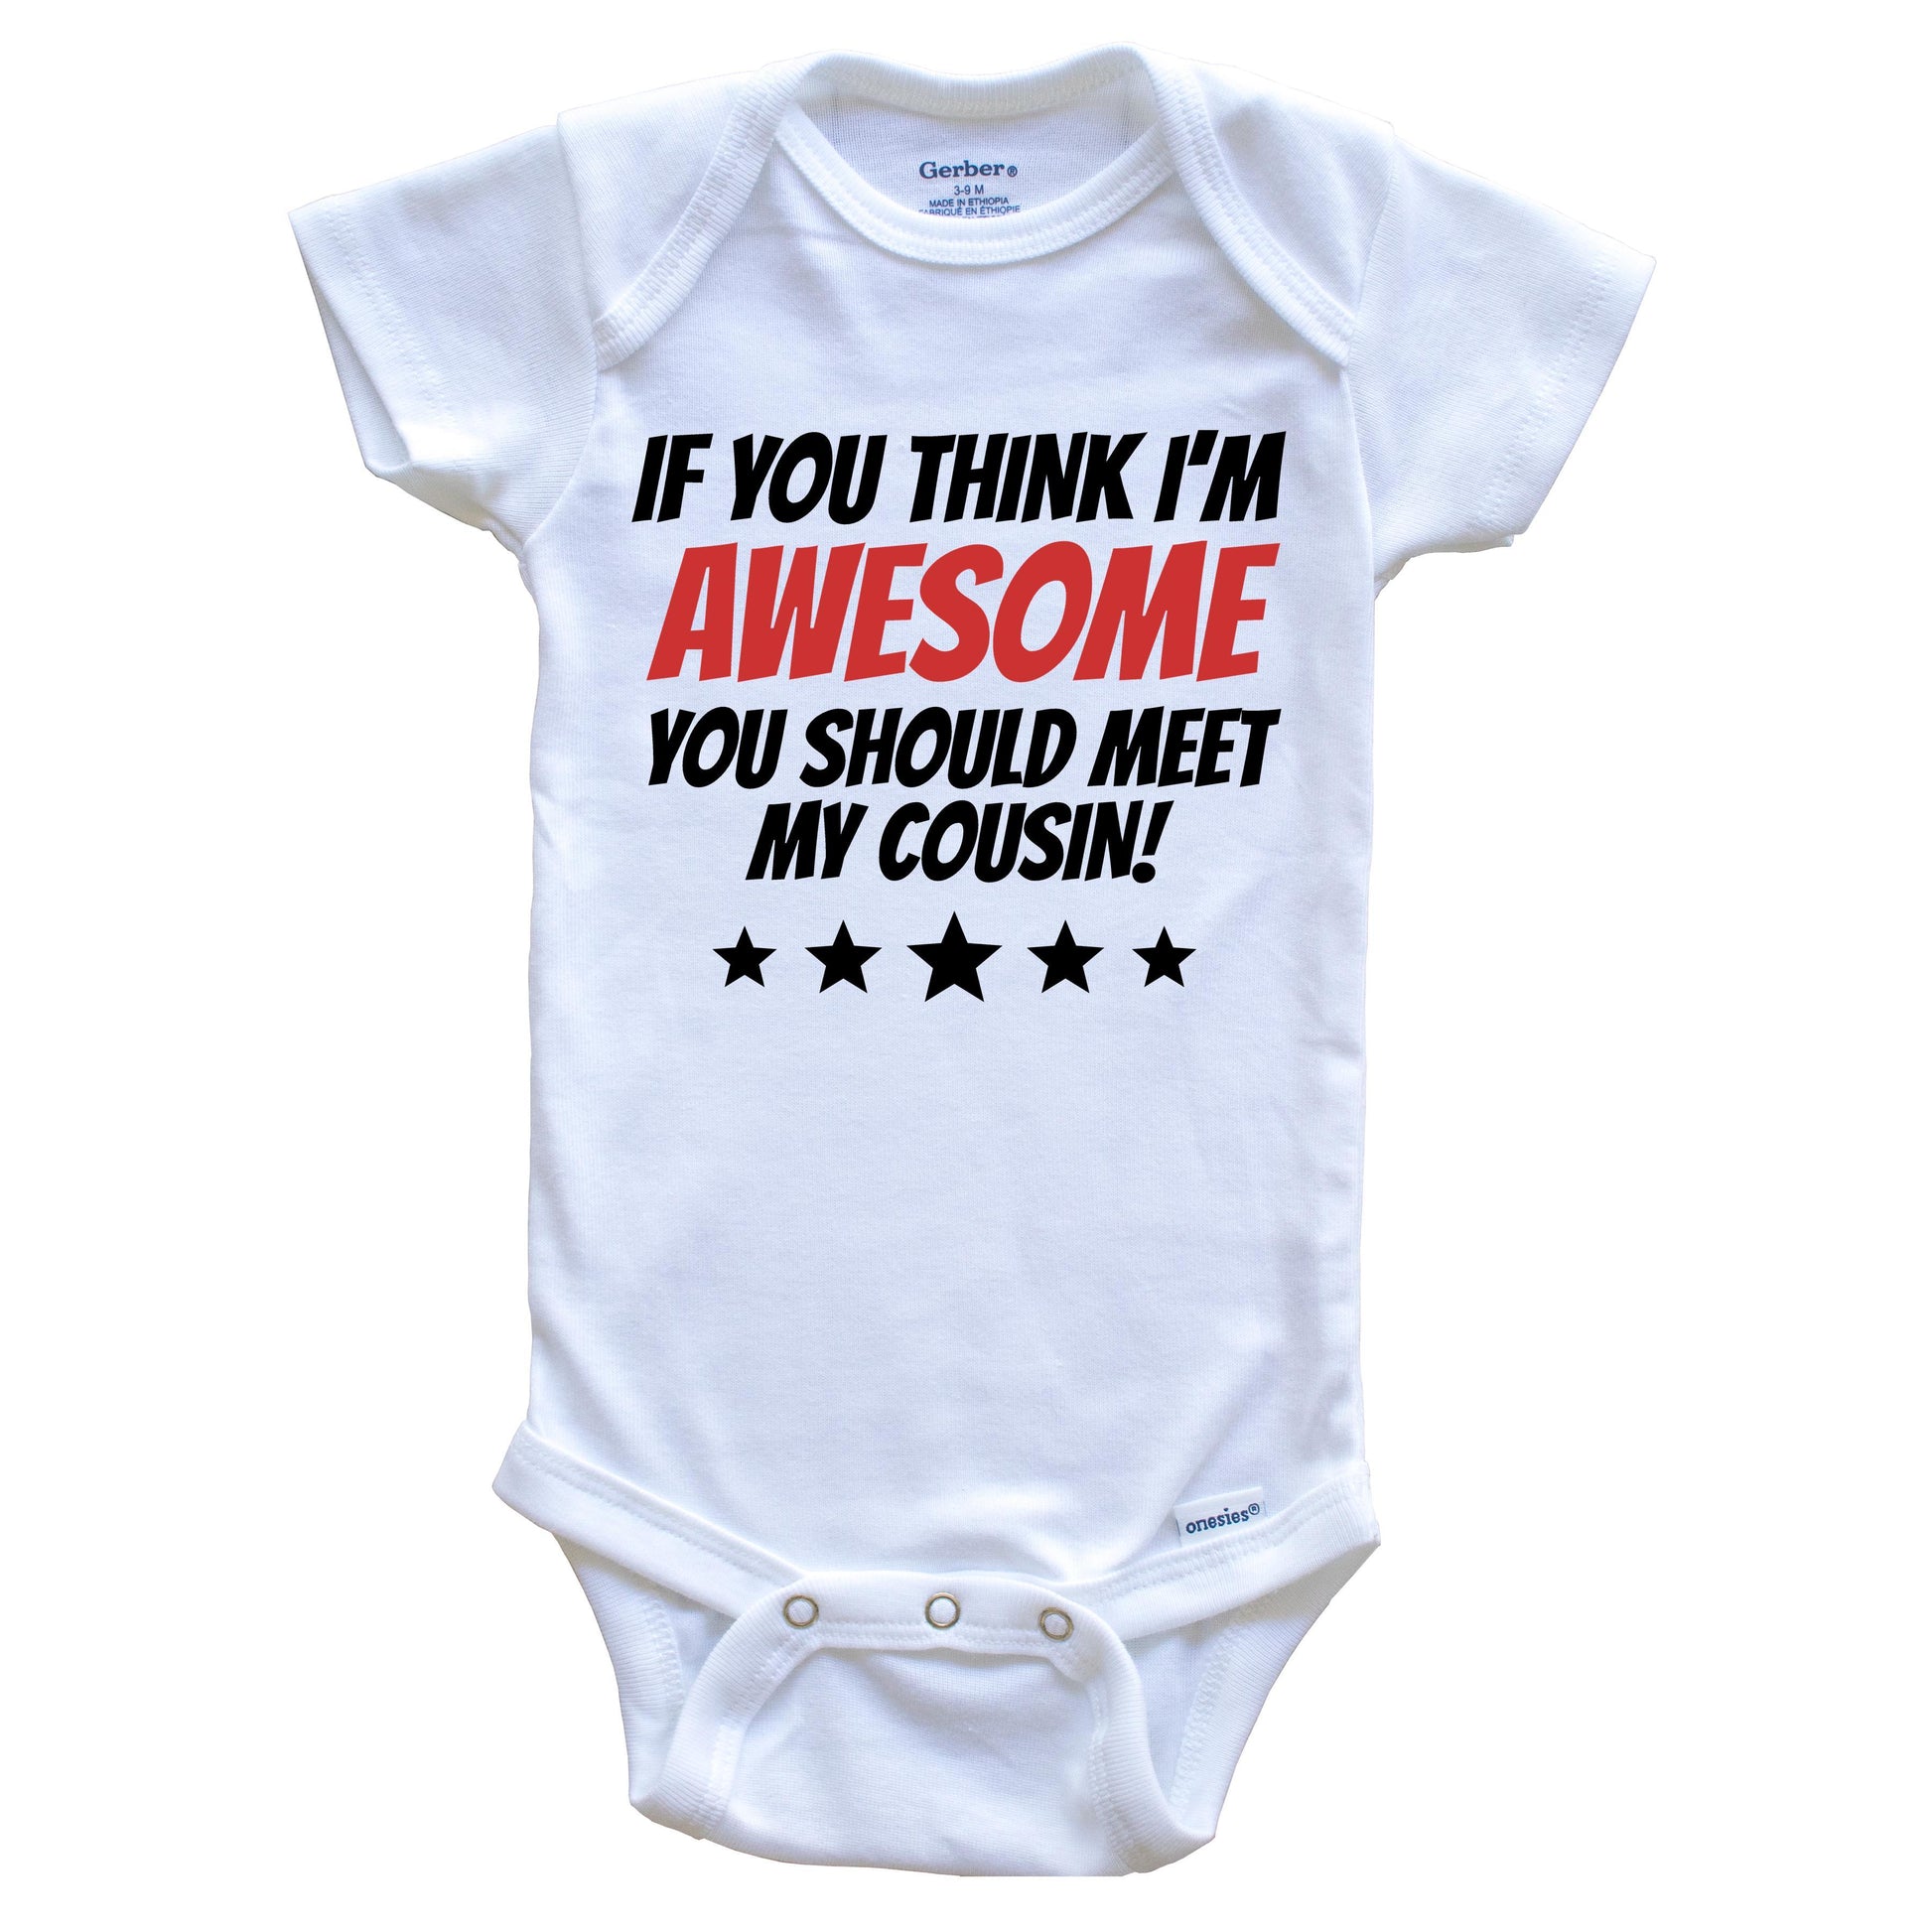 If You Think I'm Awesome You Should Meet My Cousin Baby Onesie